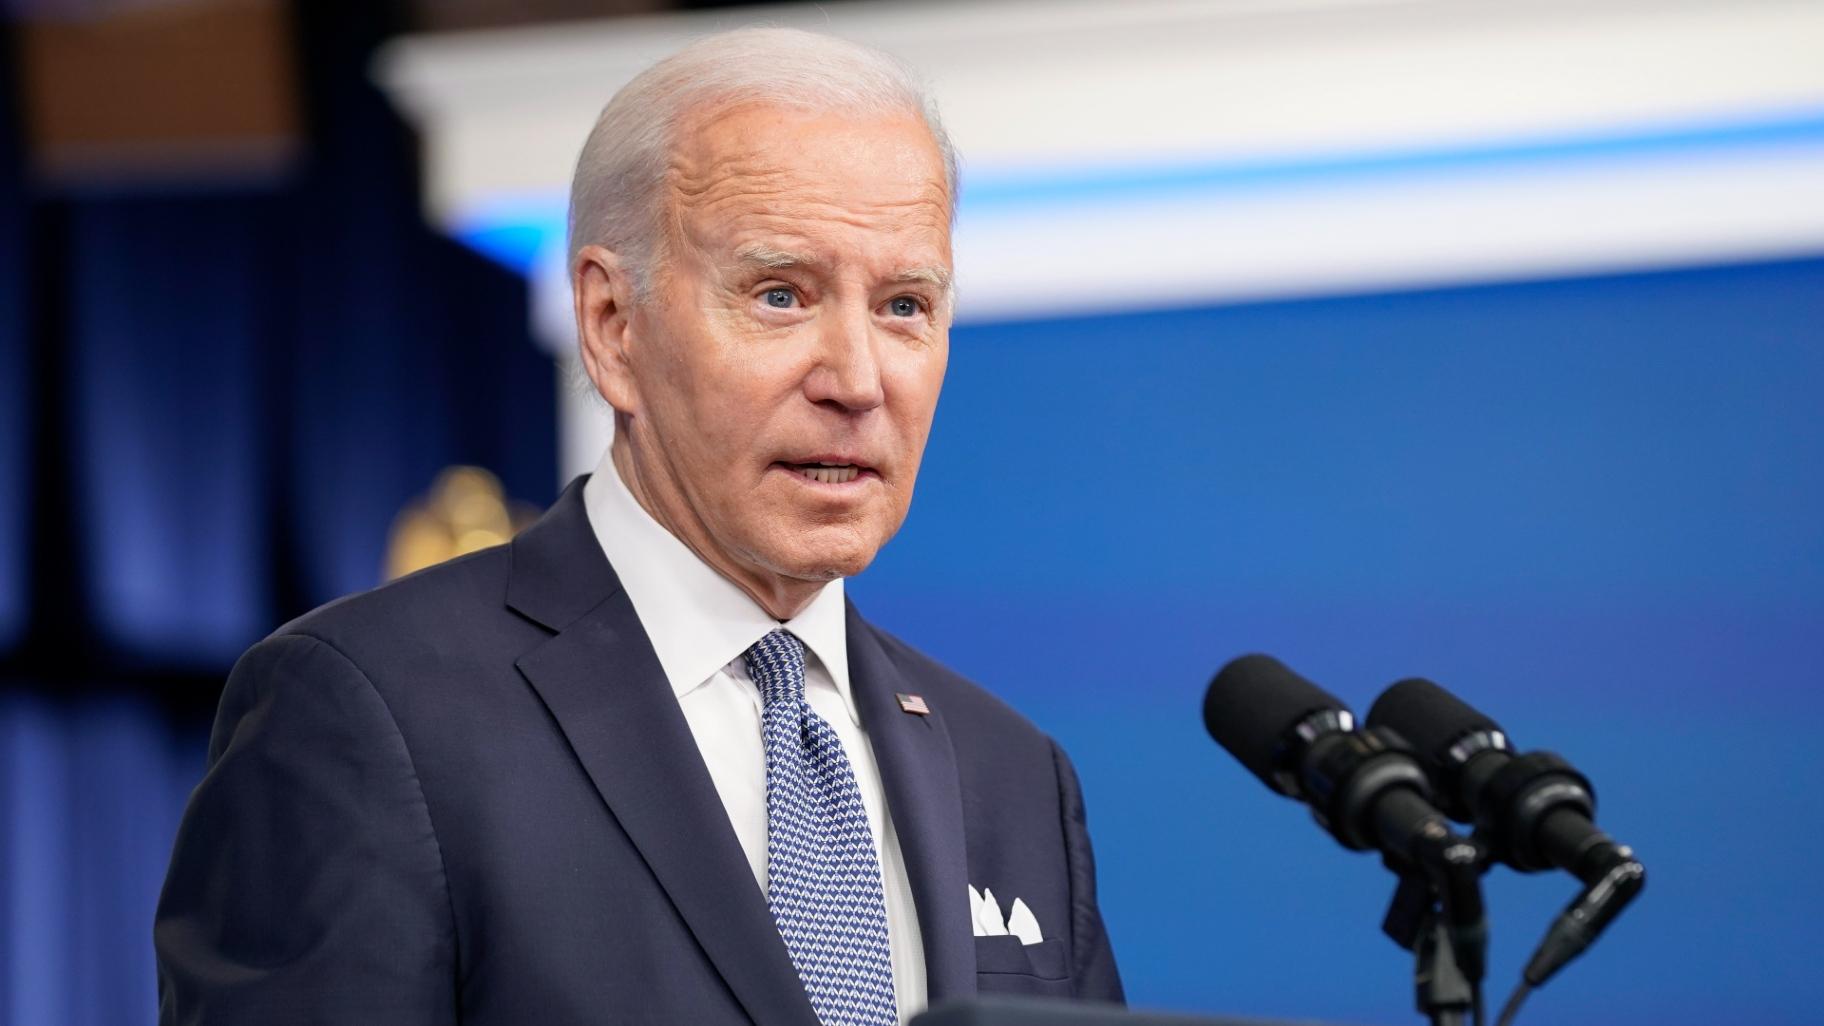 FILE - President Joe Biden responds to questions from reporters after speaking about the economy in the South Court Auditorium in the Eisenhower Executive Office Building on the White House Campus, Thursday, Jan. 12, 2023, in Washington. (AP Photo / Andrew Harnik, File)